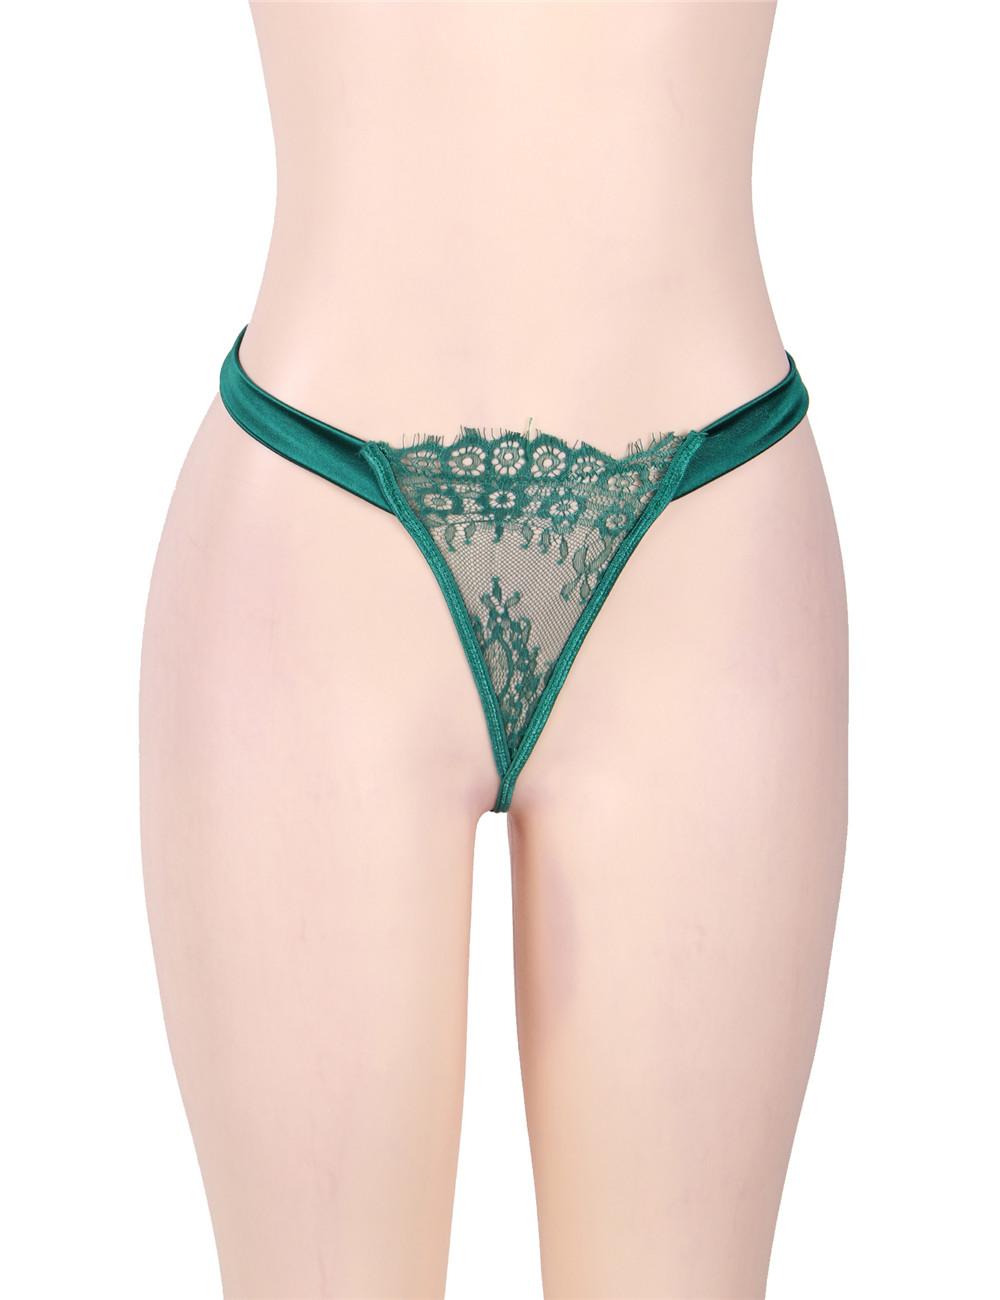 Sheer lace G-string